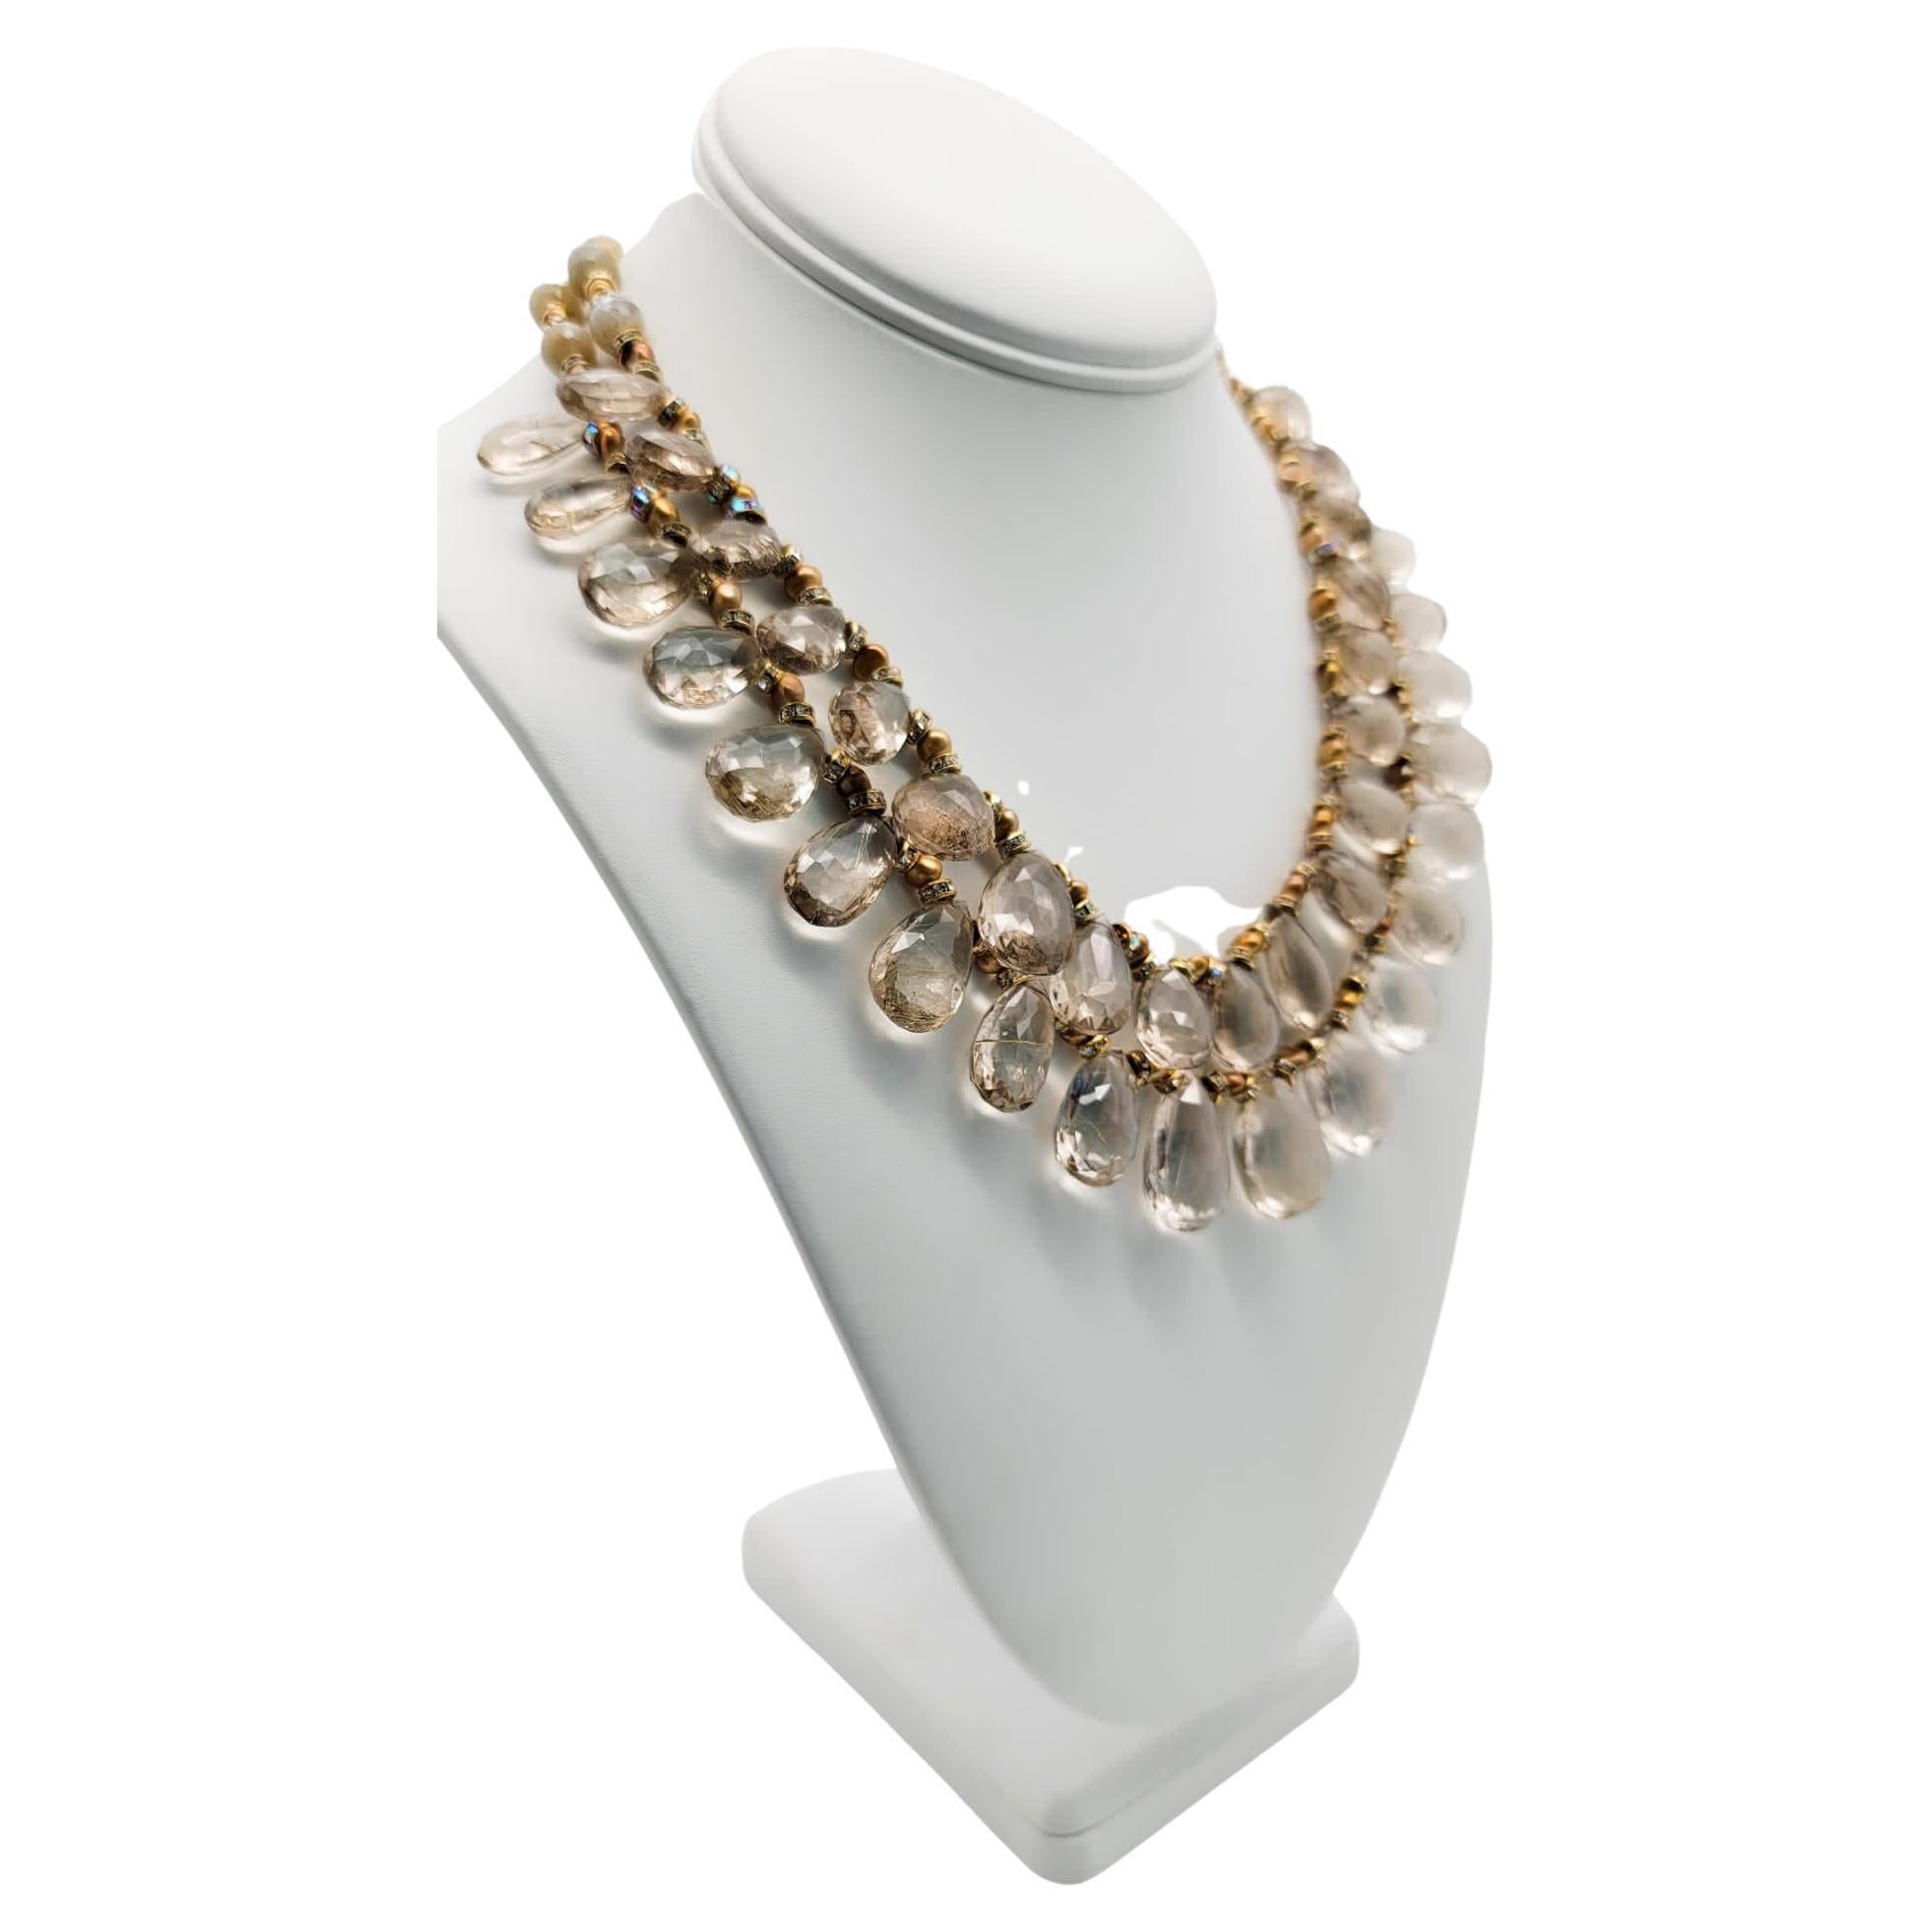 One-of-a-Kind

Rutilated quartz two-strand very sparkly necklace. Between each well-faceted Quartz teardrop, there is a spacer of vermeil inlaid with cubic zirconia and small gold pearls. The combination makes the entire necklace pop. The clasp is a